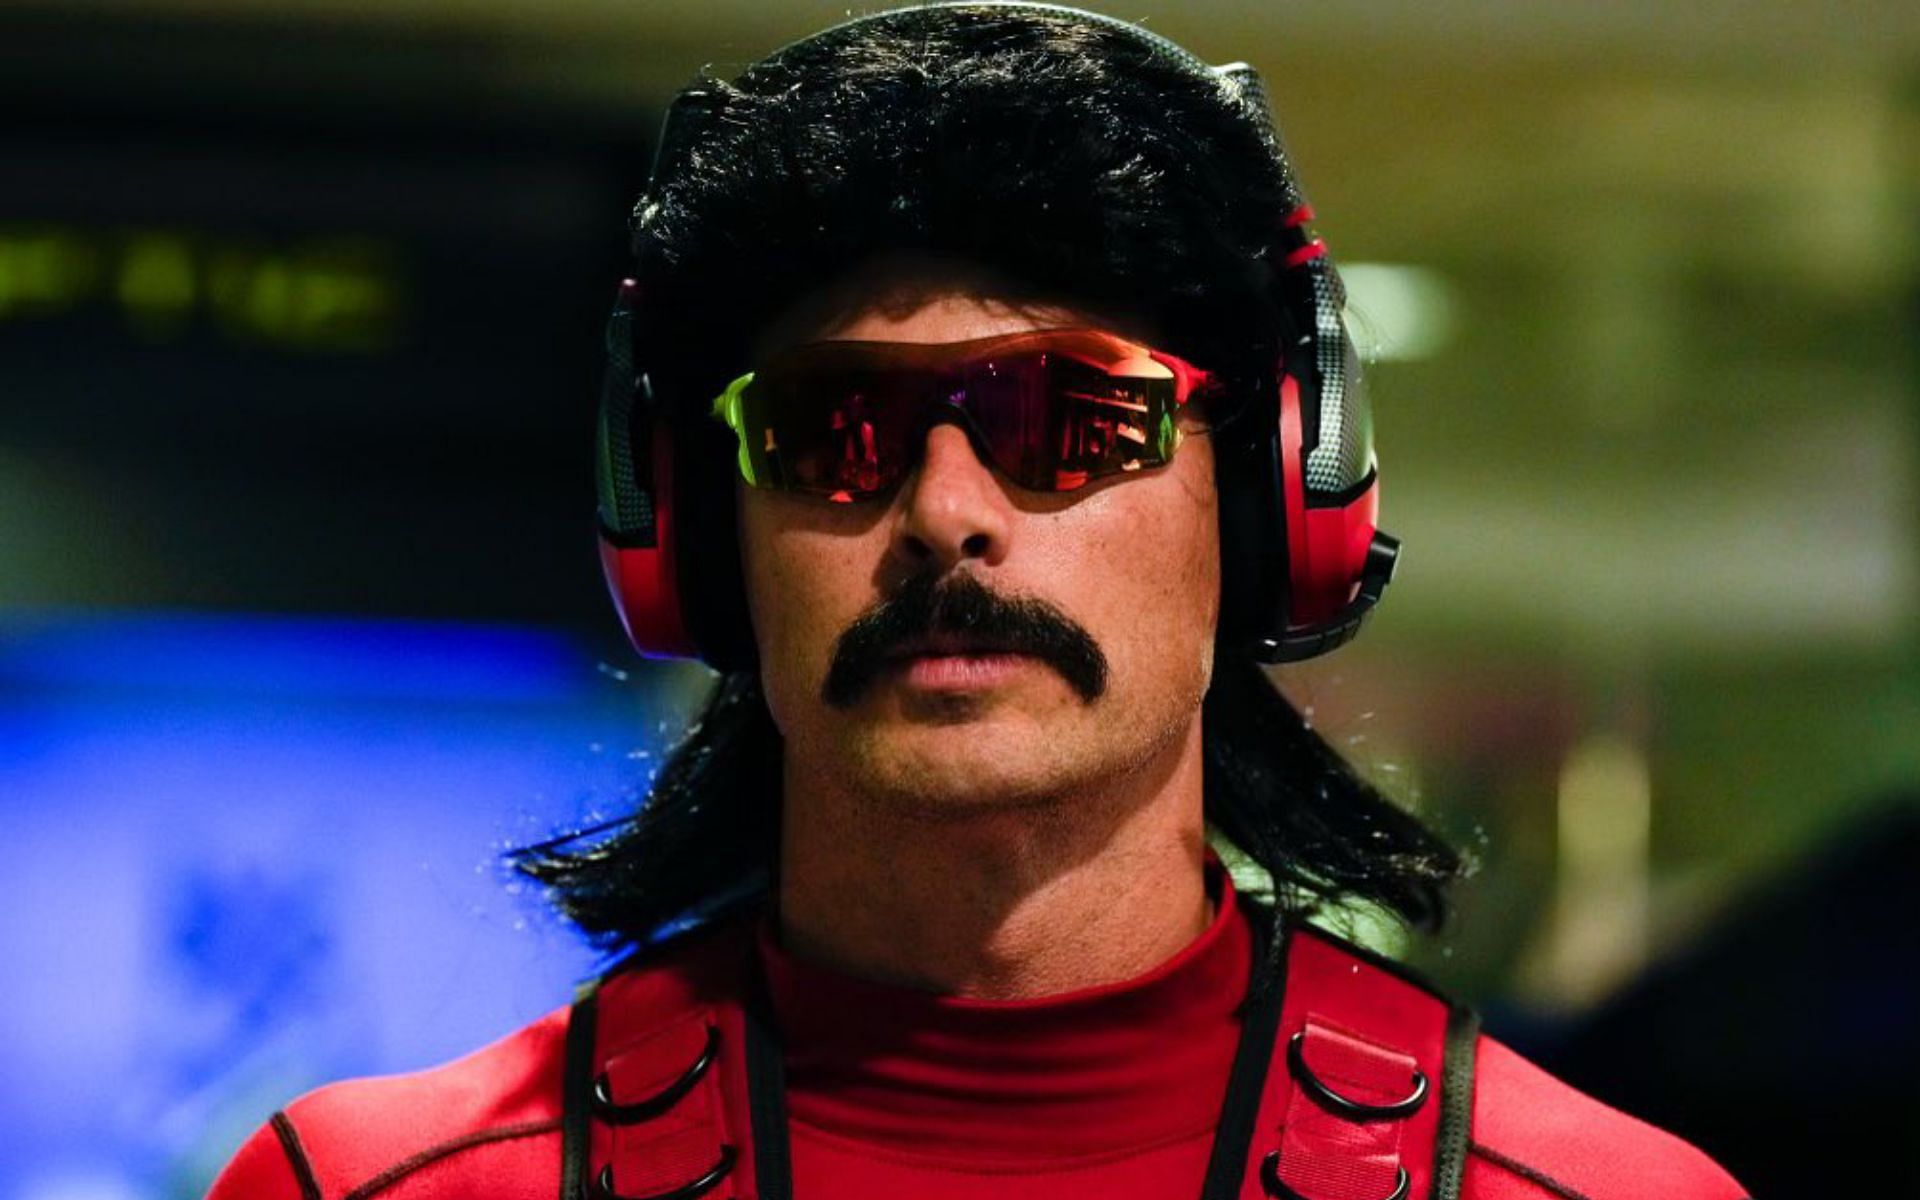 Slasher claims to have received a picture related to Dr DisRespect amid controversy